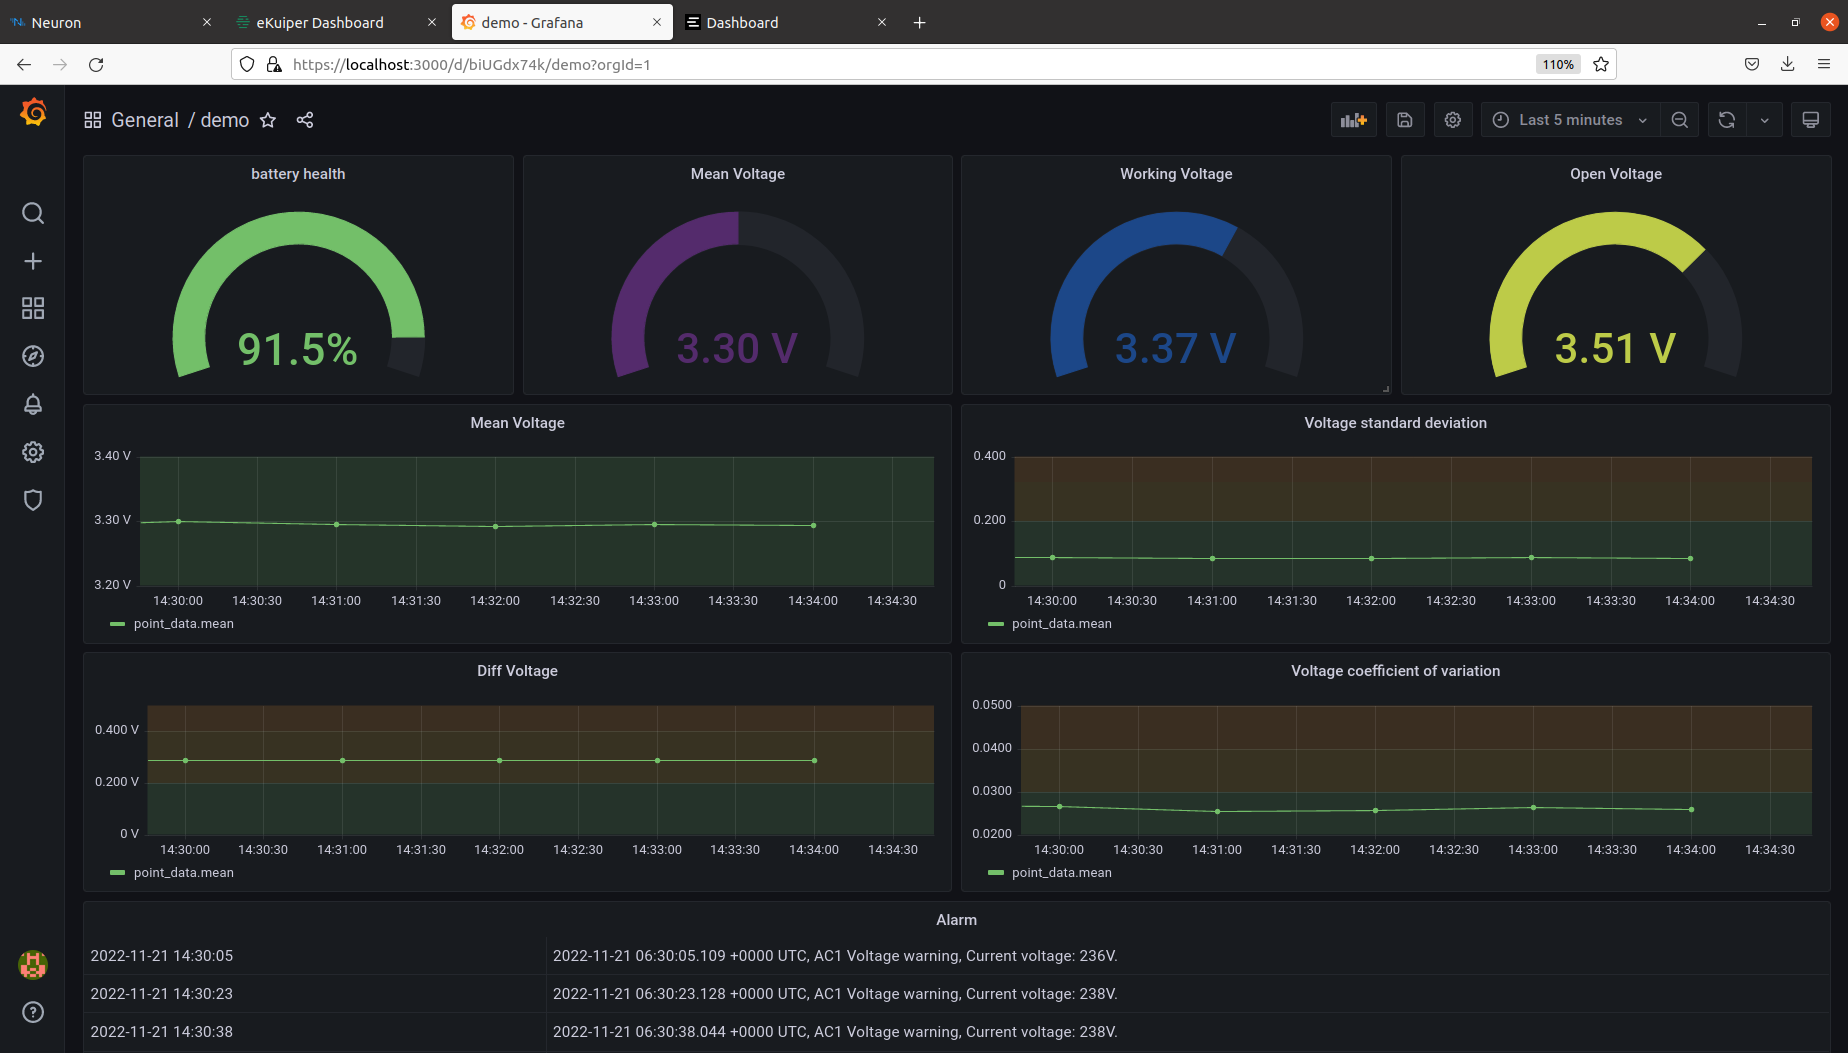 Grafana dashboard showing four types of data: battery health, mean voltage, working voltage, and open voltage. 